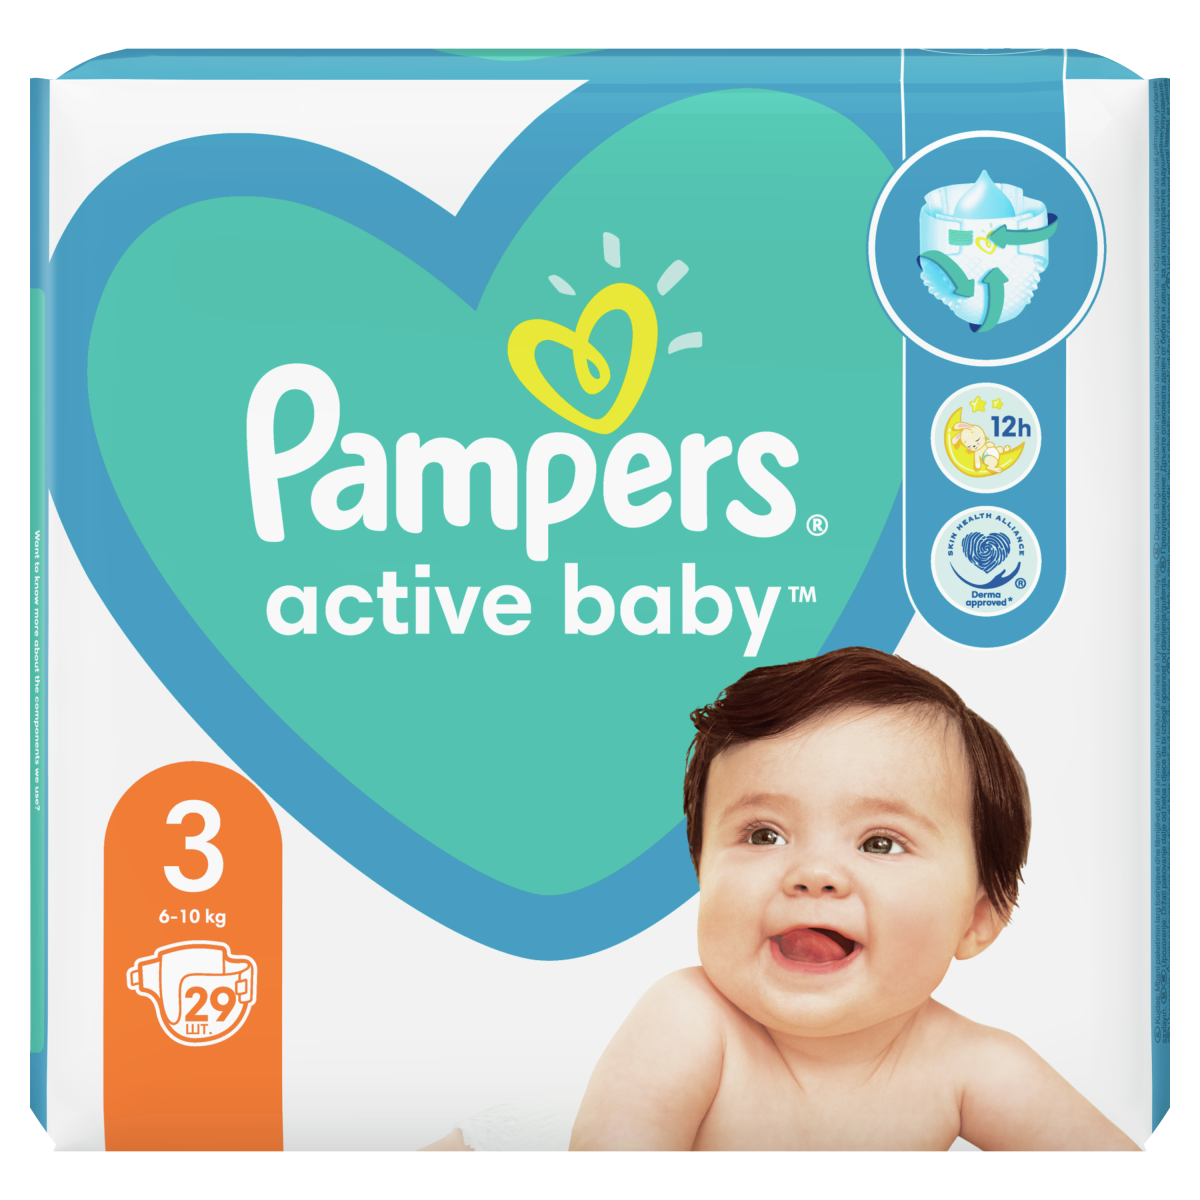 SCUTECE PAMPERS ACTIVE BABY 3 6-10 KG 29BUC